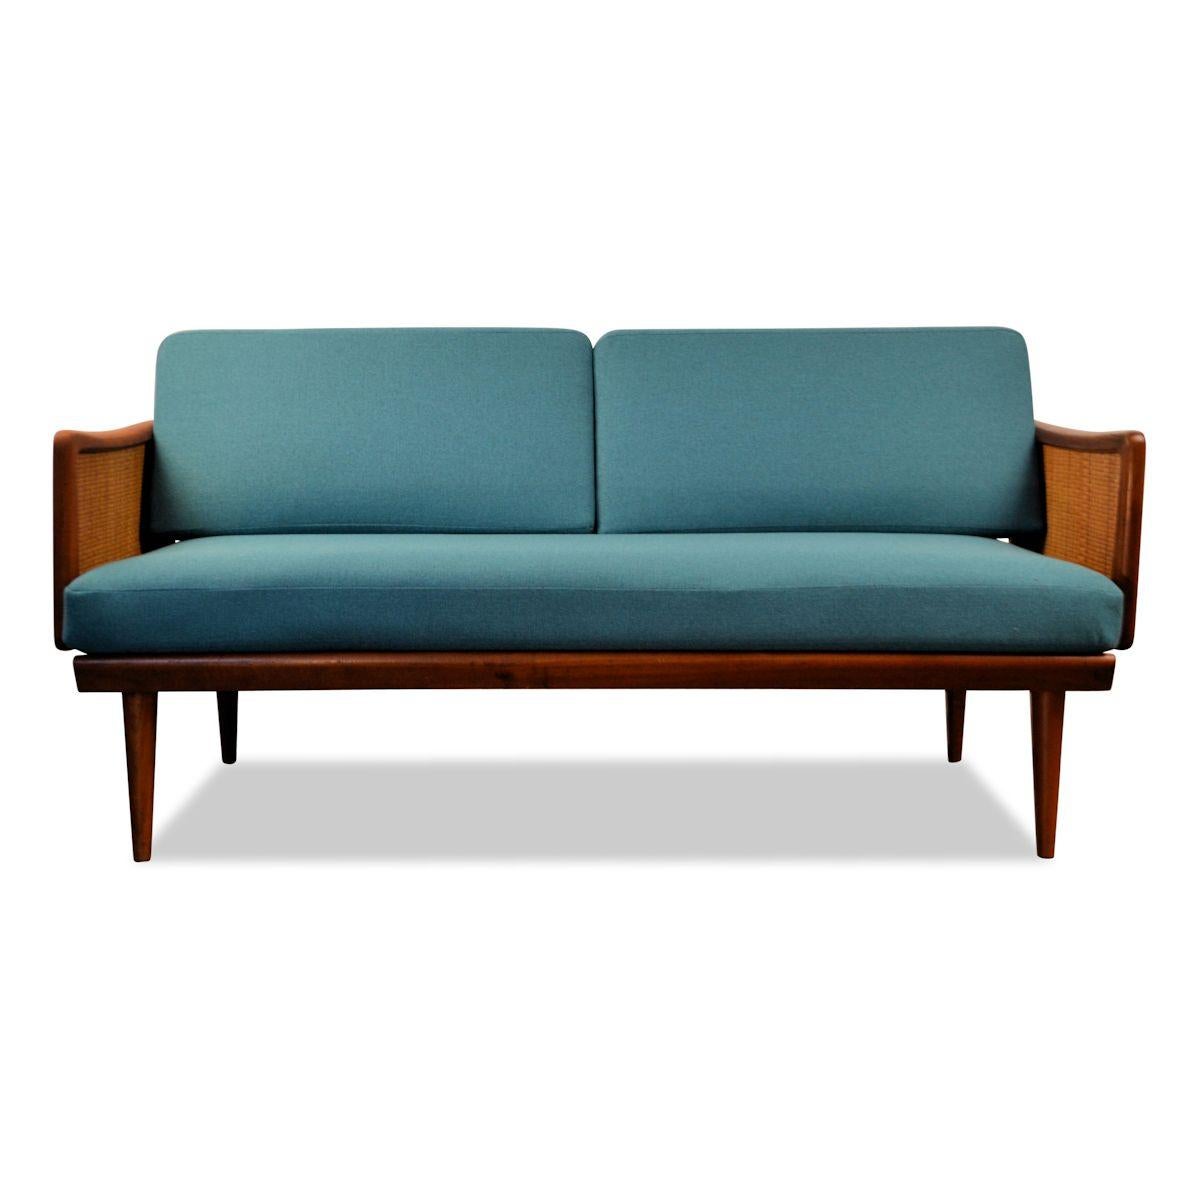 Vintage two-seat sofa designed by the famous Danish designer duo Peter Hvidt & Orla Mølgaard-Nielsen for France & Daverkosen. This model 451 features a typical 1950s Danish design, a lovely combination of teak wood and rattan and new high quality